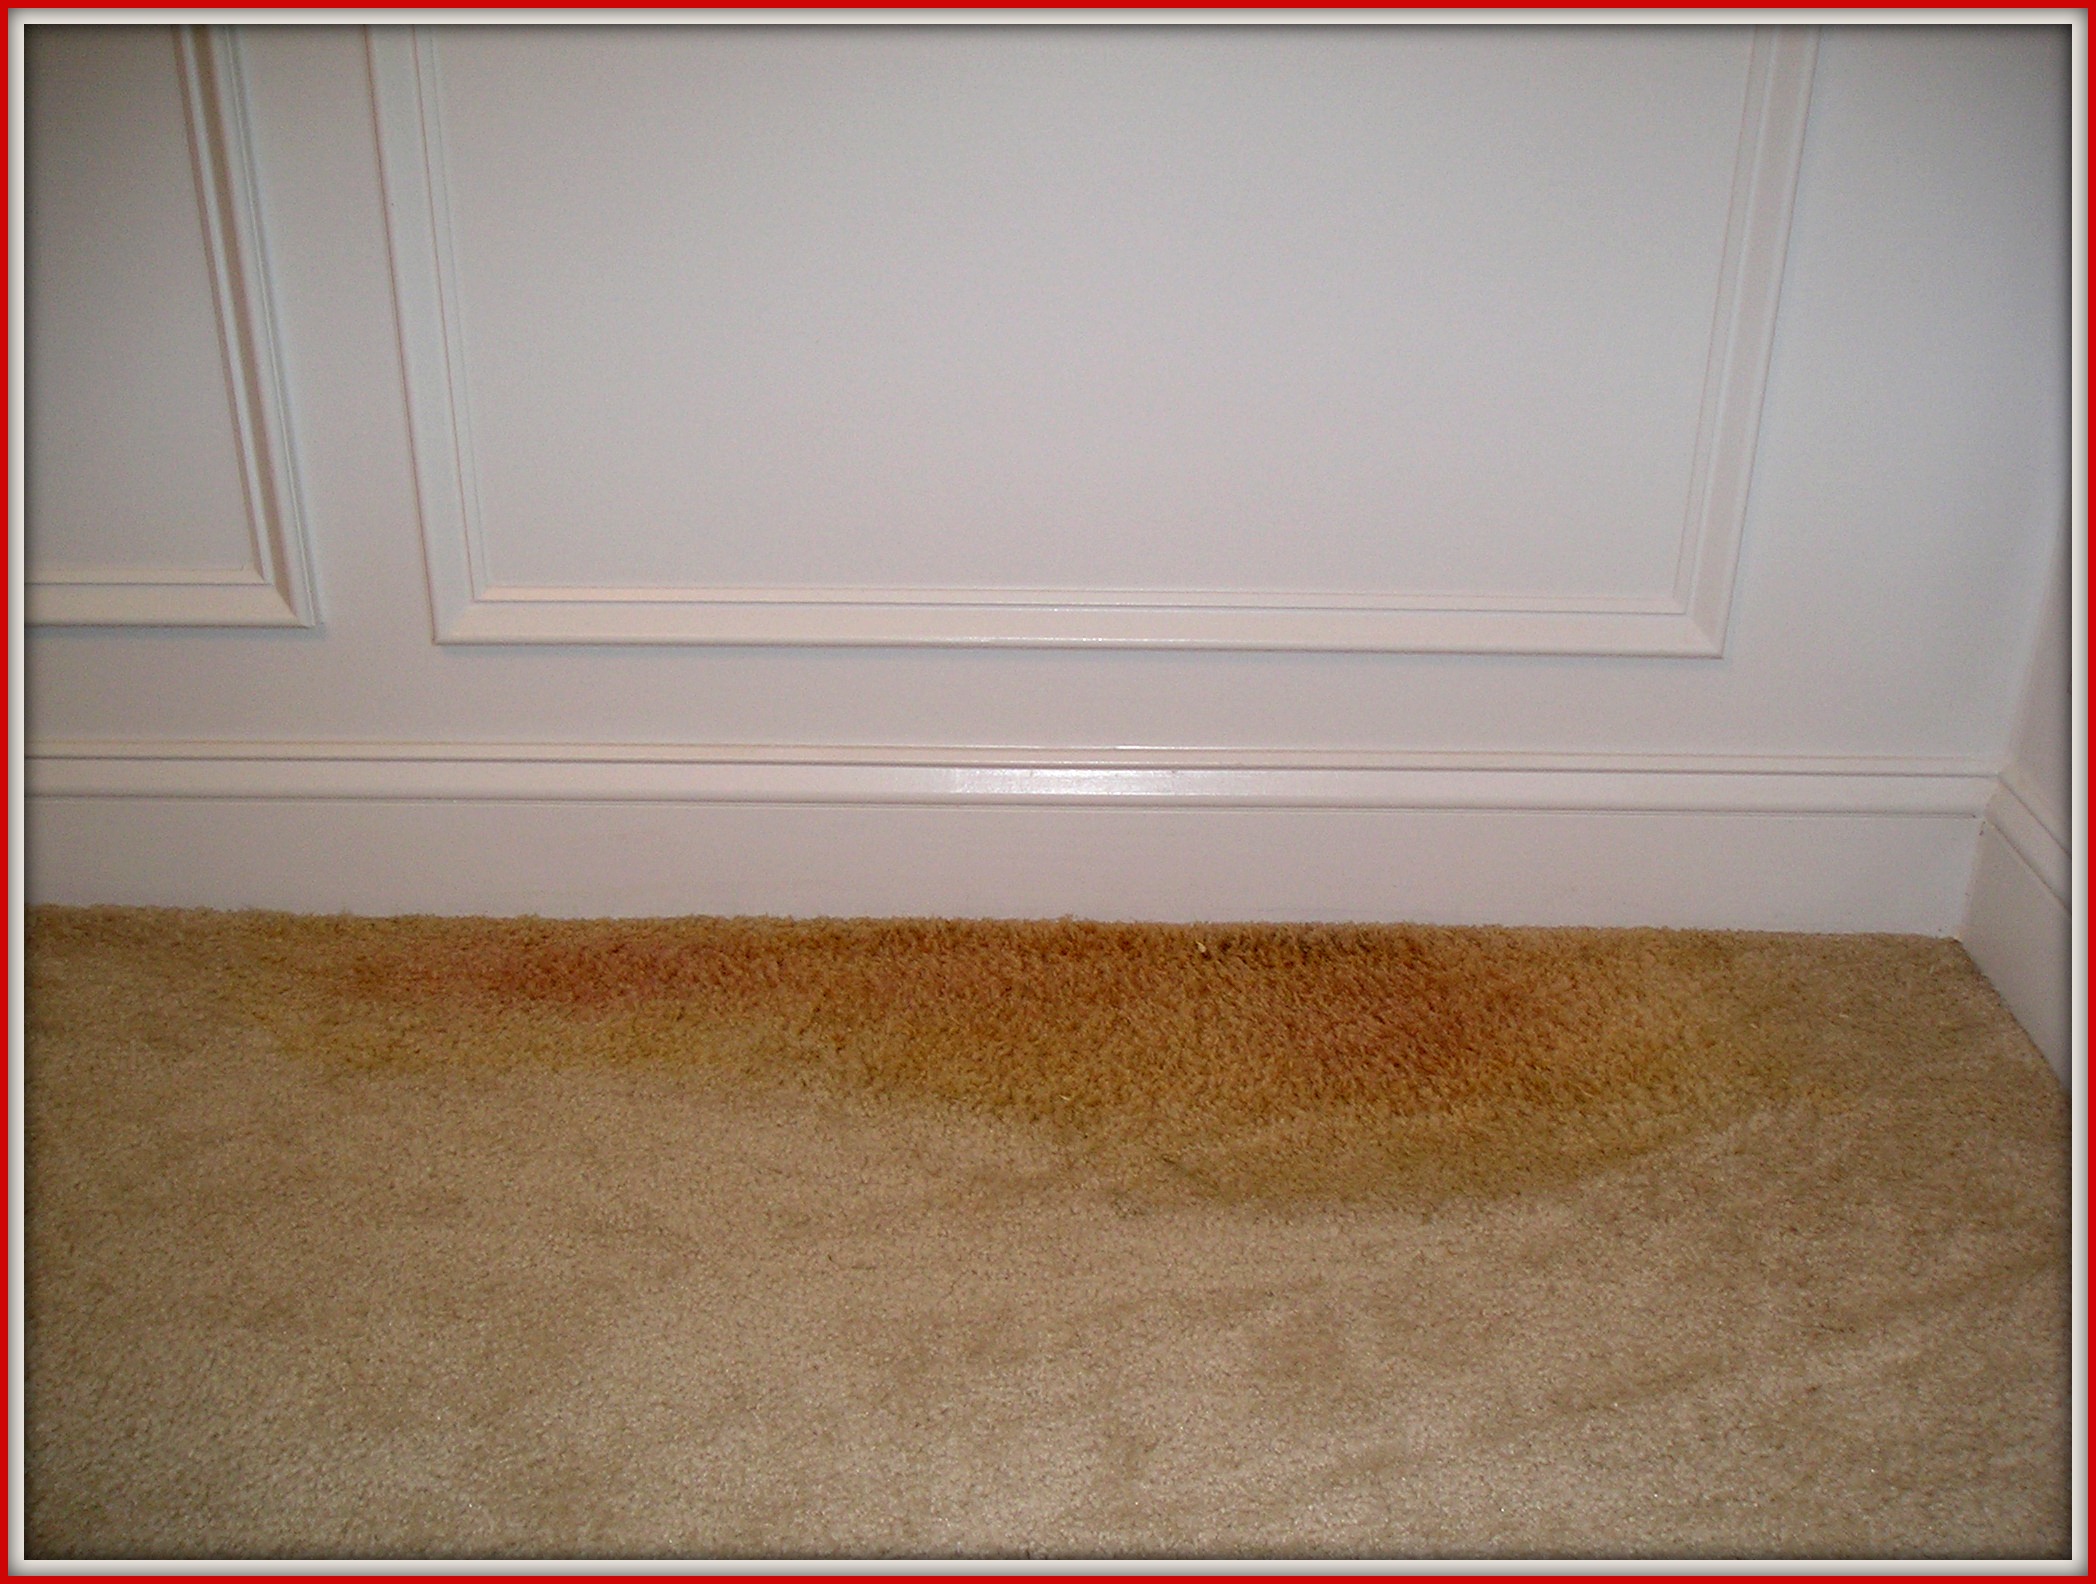 remove cat urine from rug